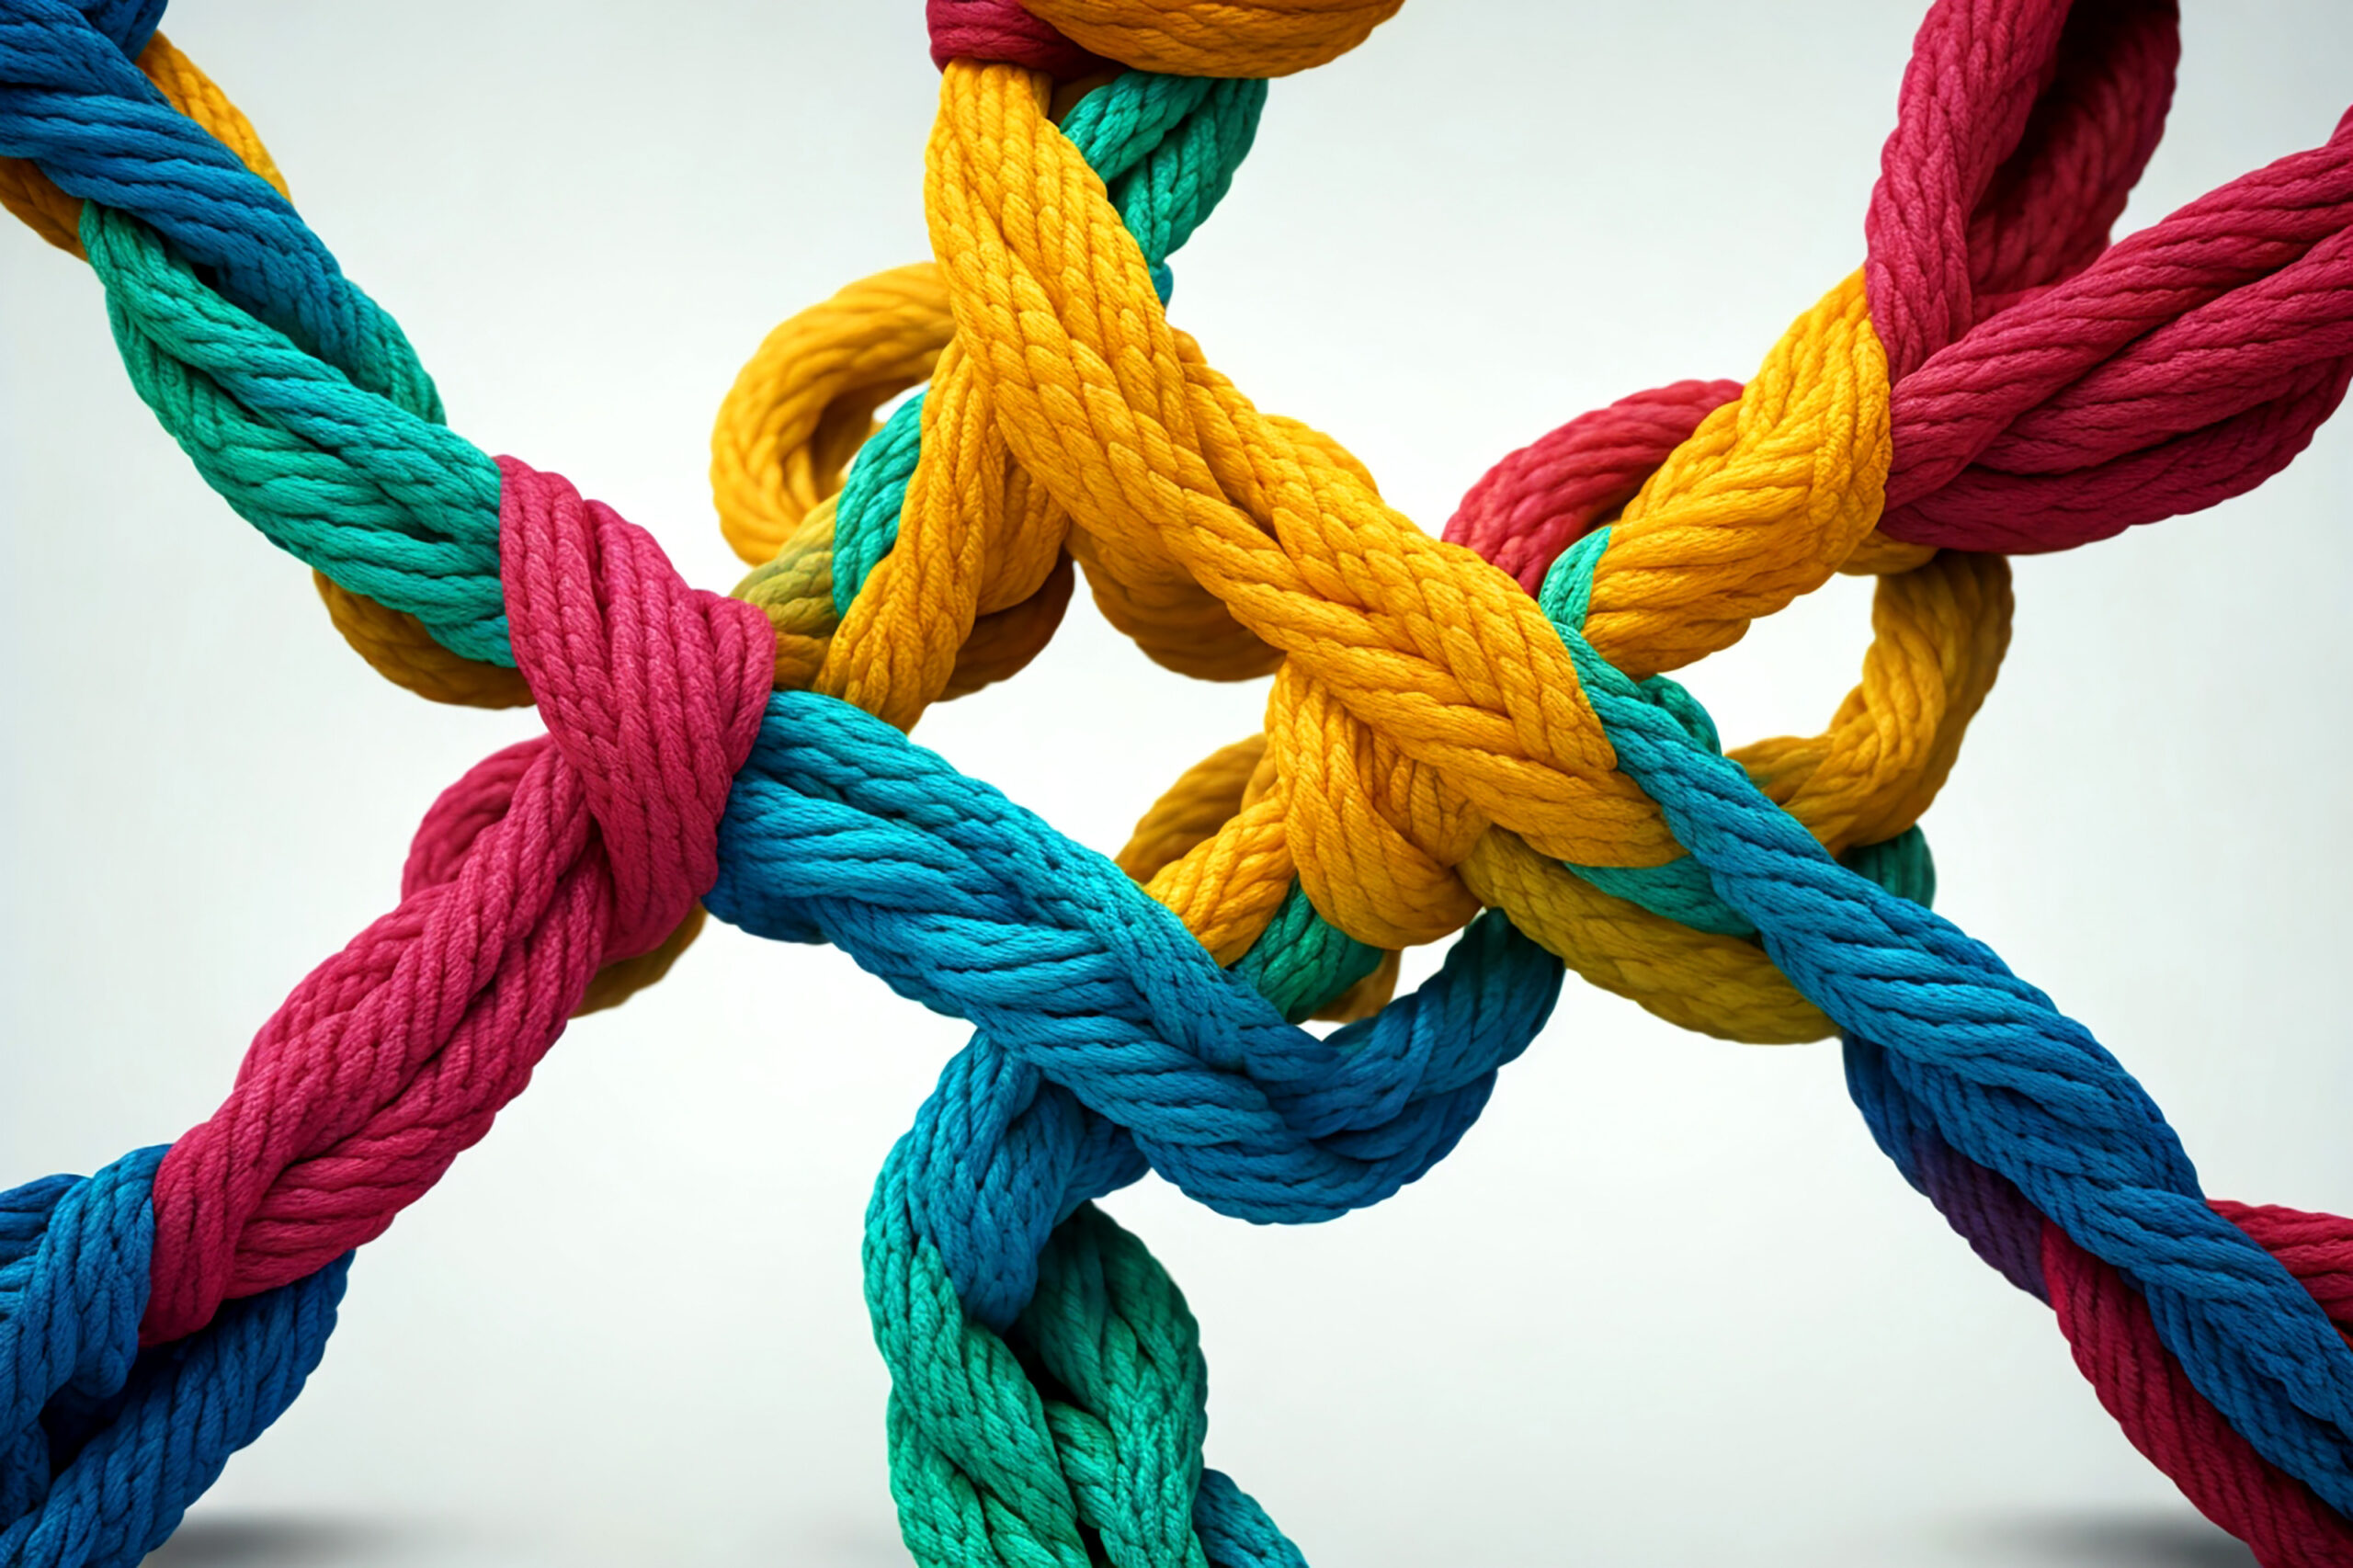 Collective Effort Integration and Unity with teamwork concept as a business metaphor for joining a partnership synergy as diverse ropes connected together in interdependence1